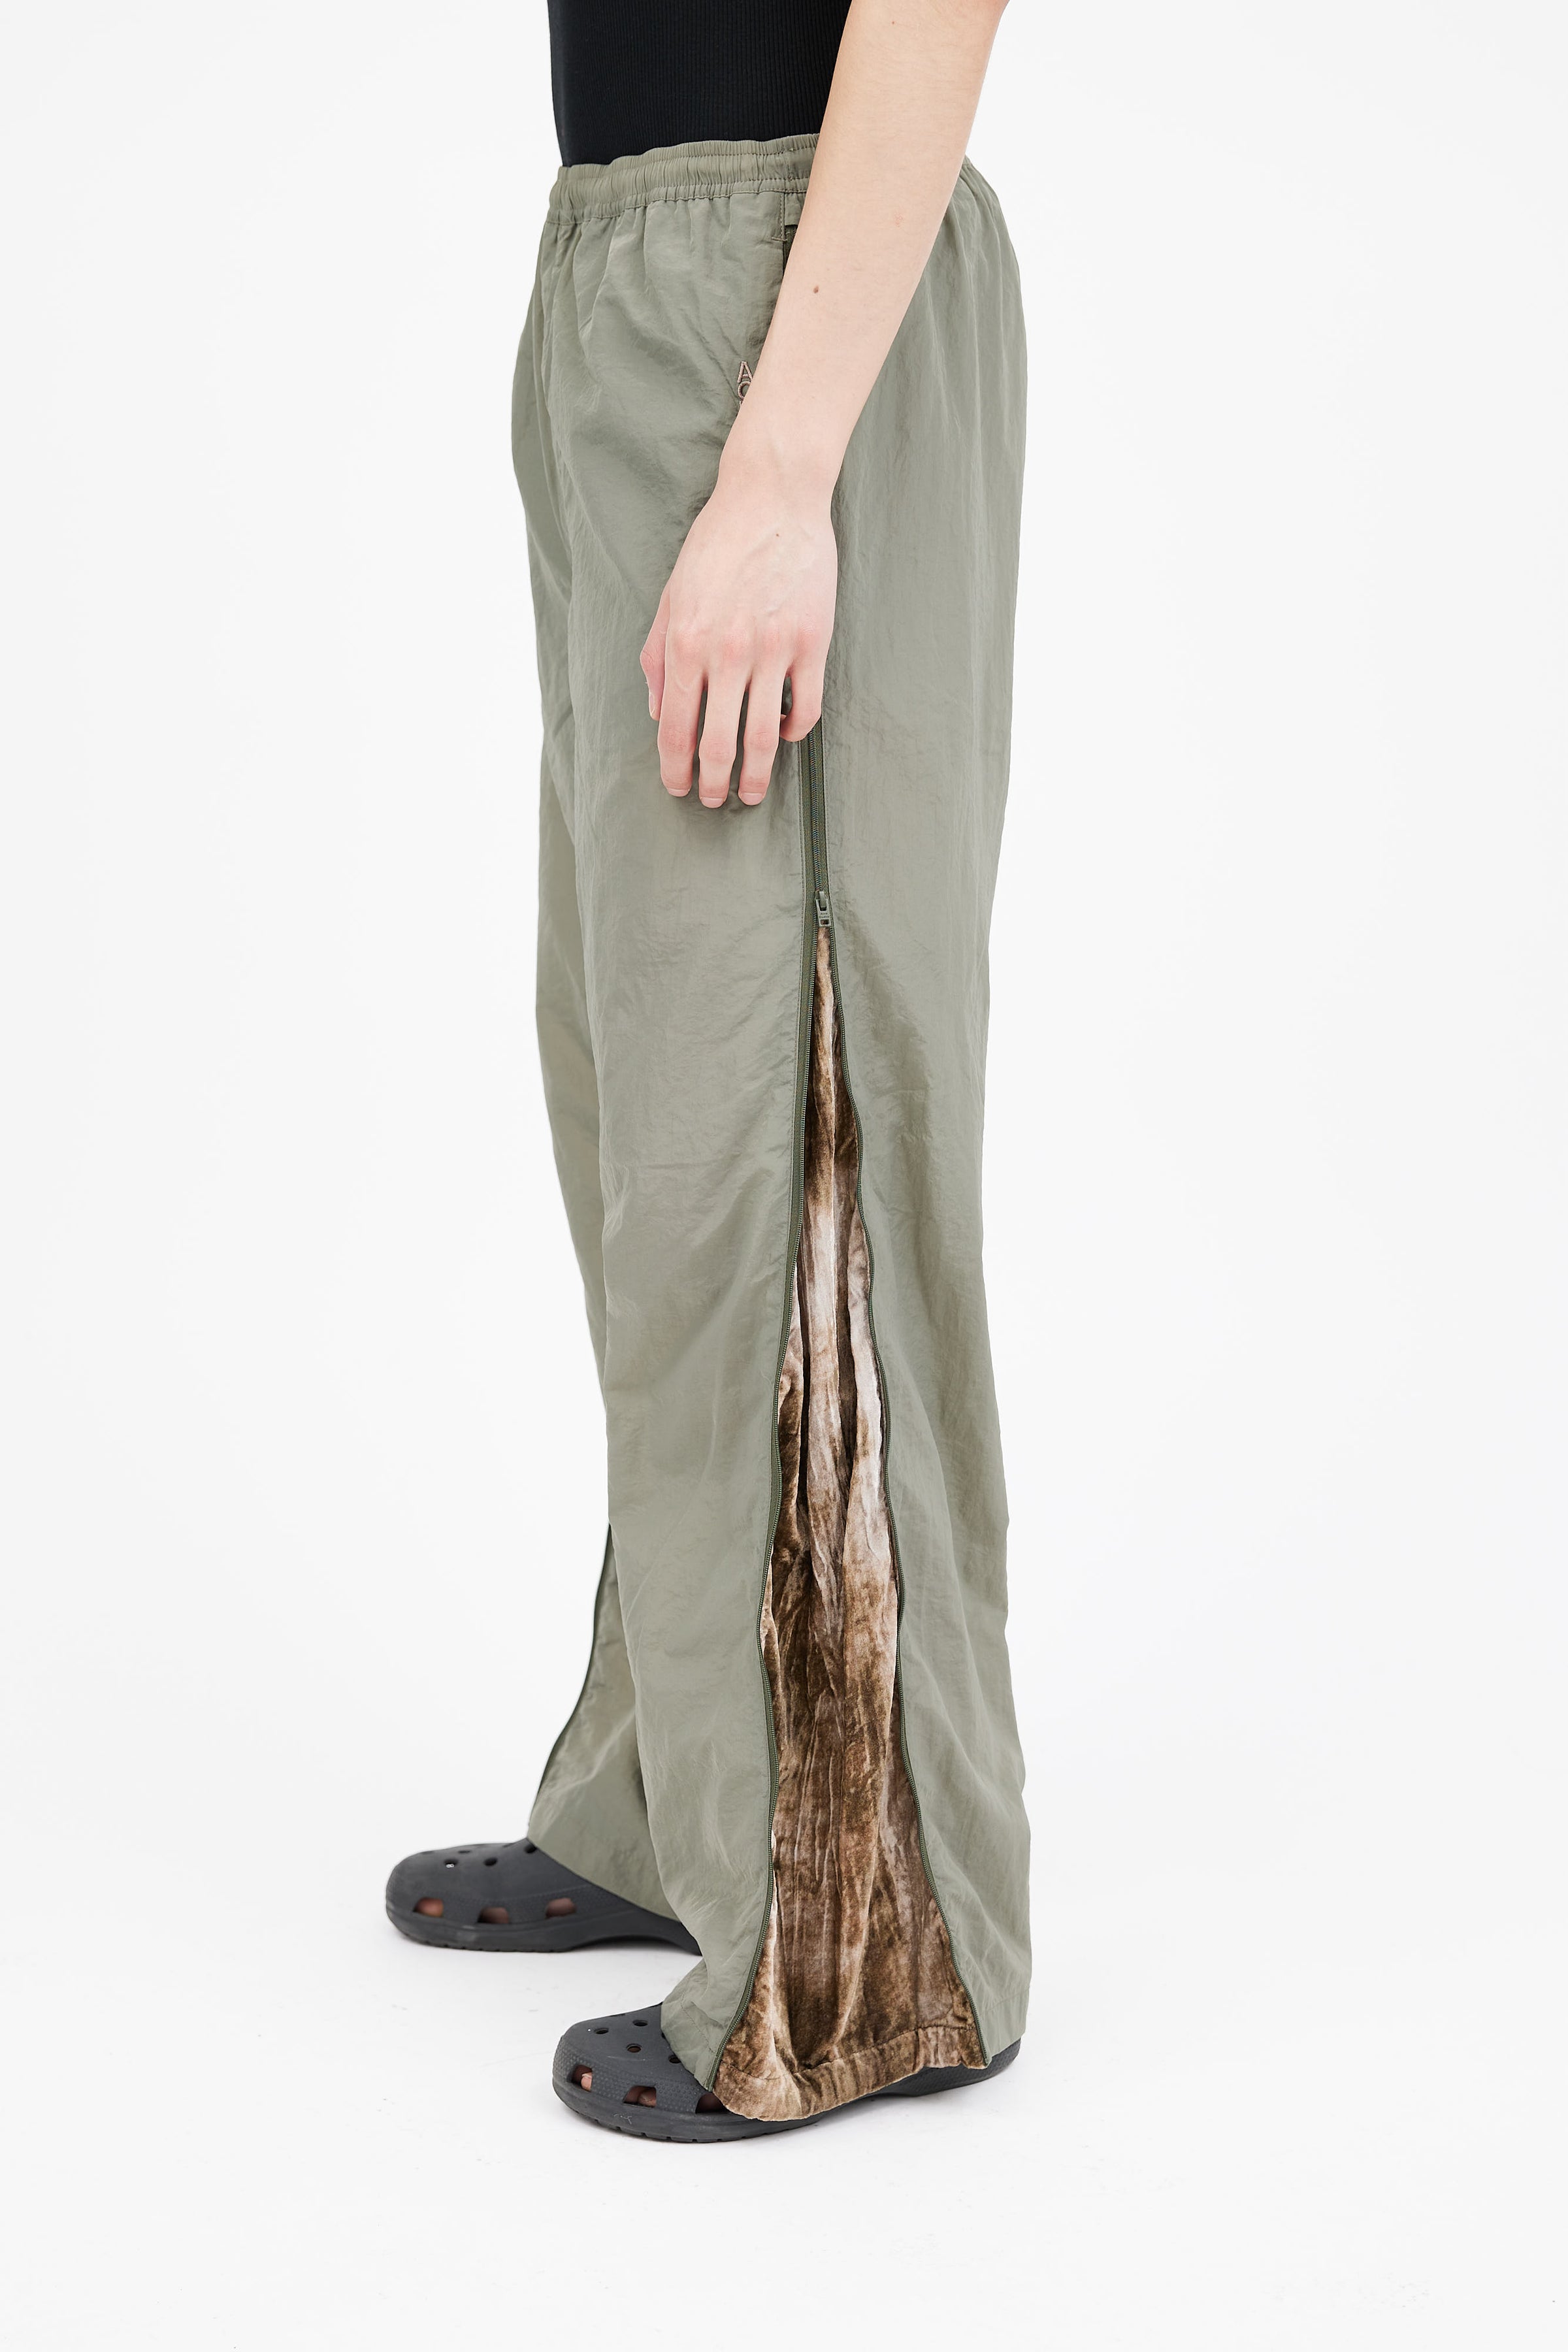 ACNE STUDIOS STONE RELAXED FIT SIDE ZIP PANTS – AREA+001